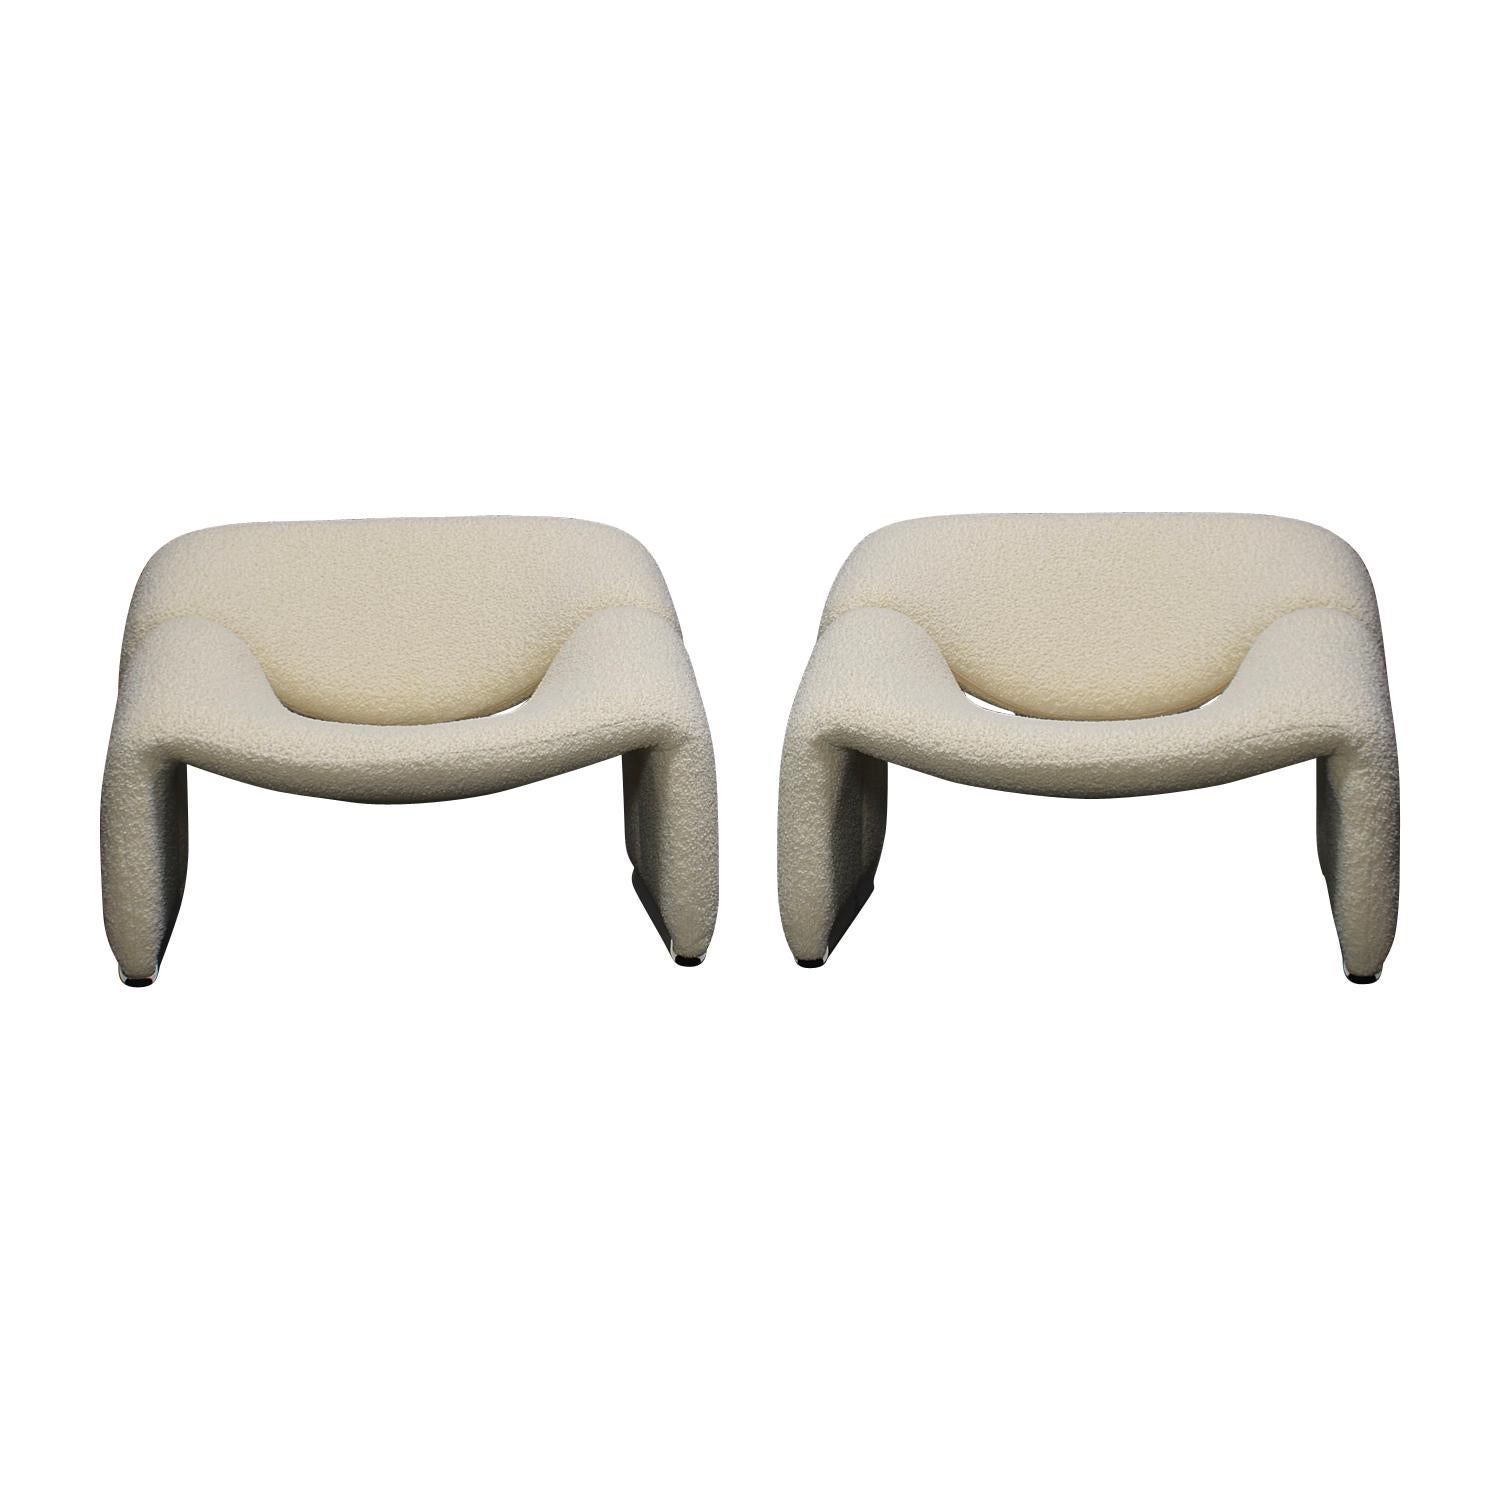 Pair of f598 ‘Groovy’ 'M' lounge chairs by Pierre Paulin for Artifort with rare white feet, Netherlands, 1972.
Price is per chair.

The chairs have been reupholstered in a beautiful off-white bouclé wool fabric from Paris. White lacquered